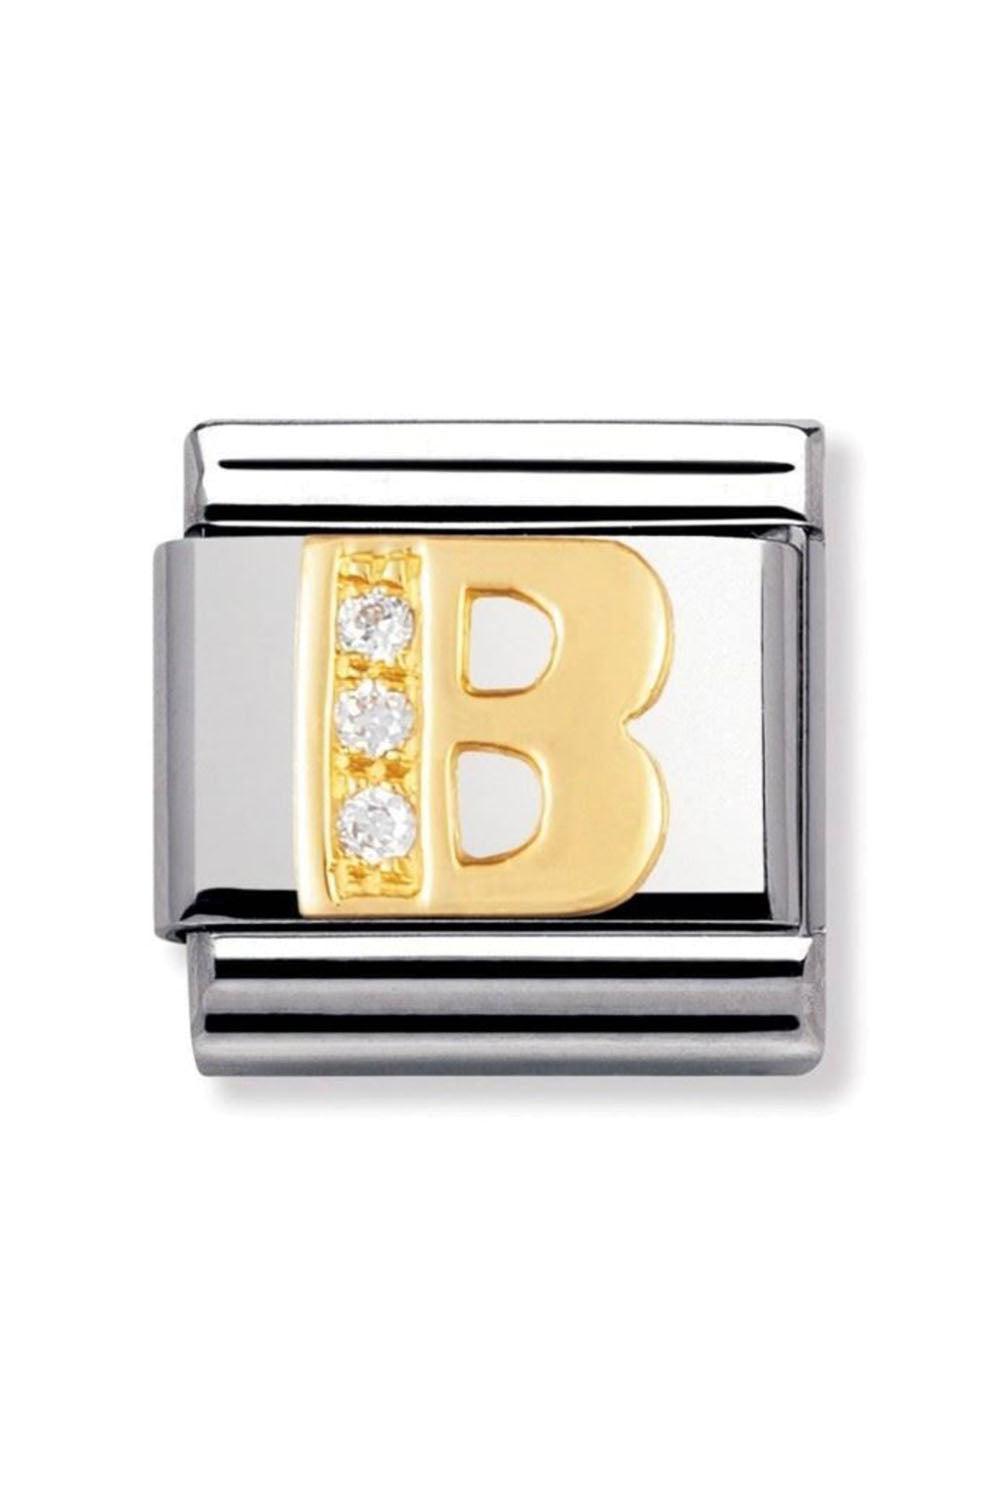 LETTERS 18k Gold and CZ  B